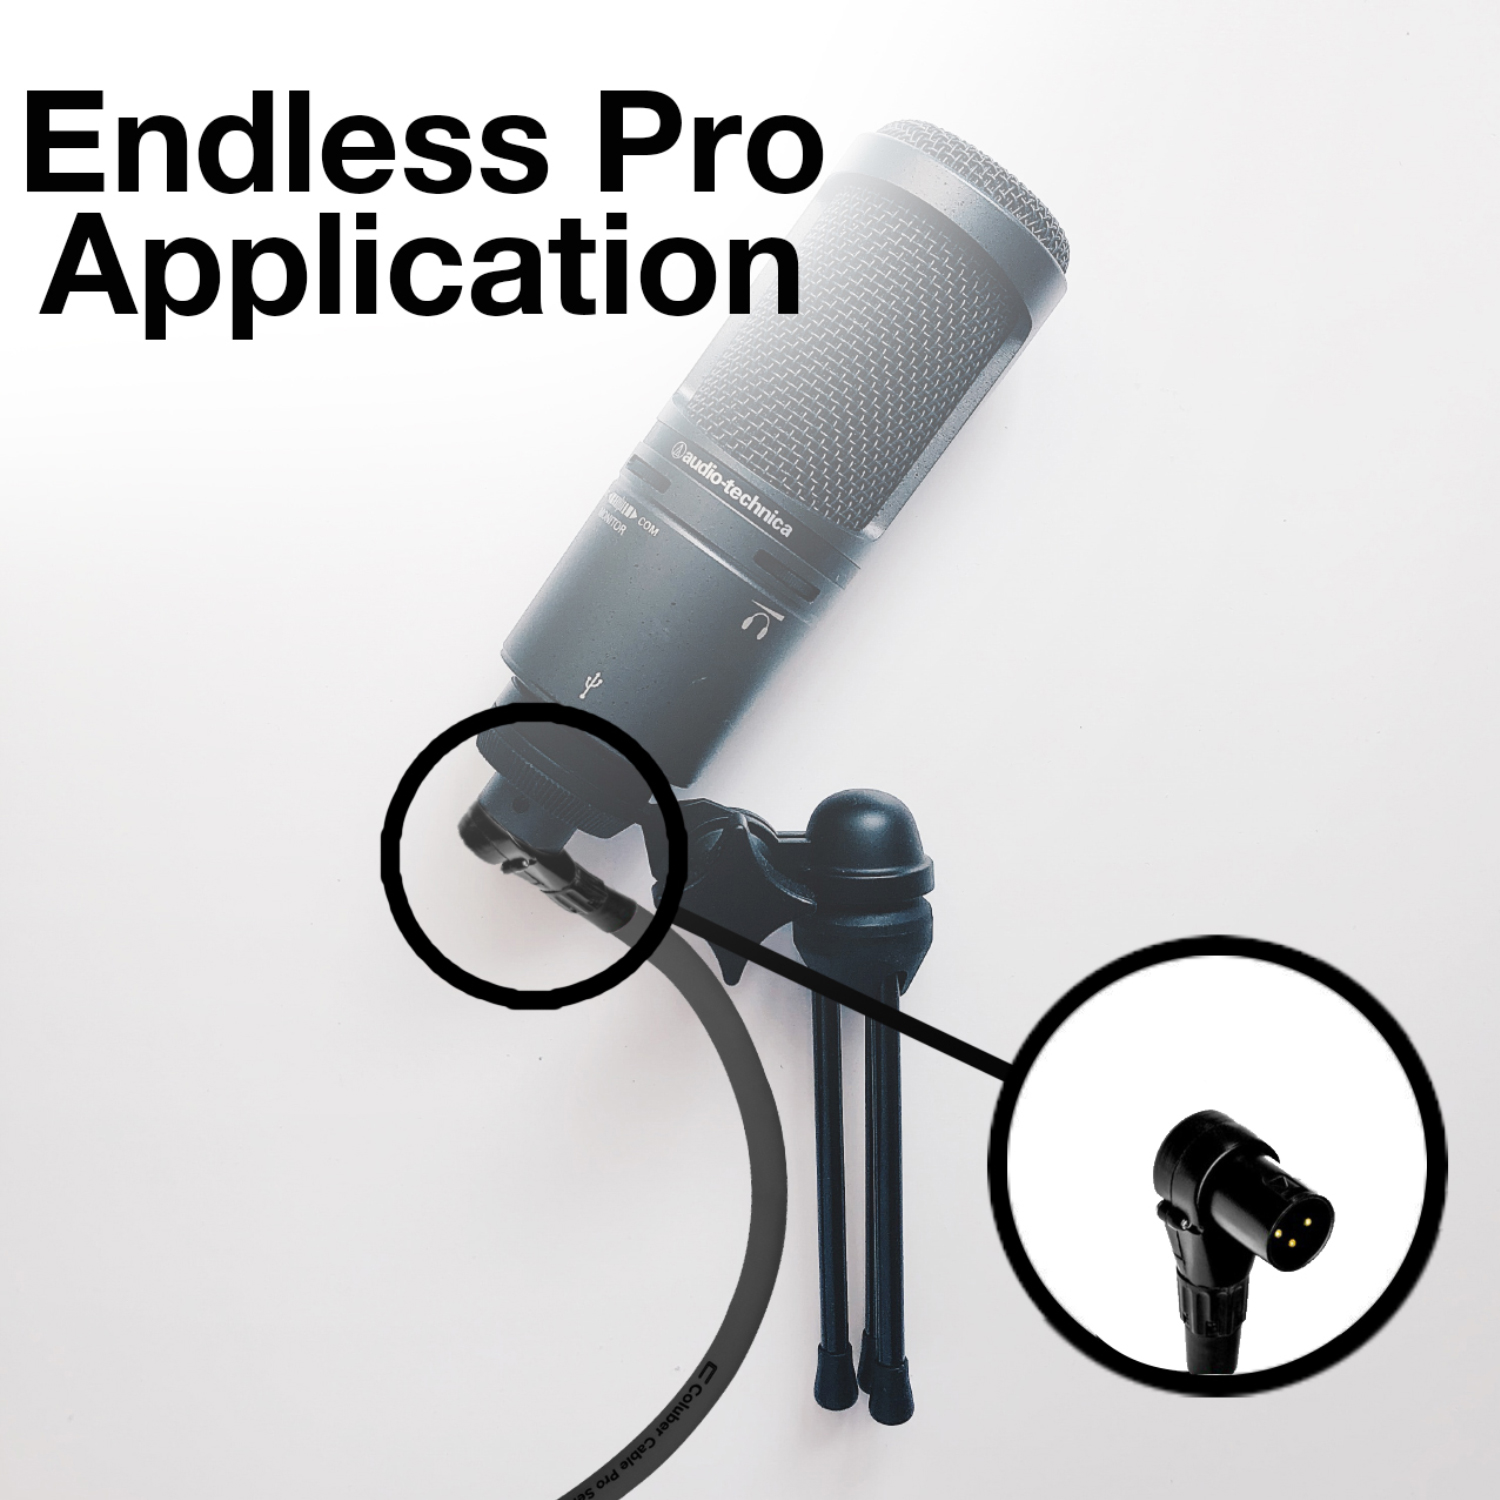 Right Angle XLR Male to 1/4" TRS Male - 0.5 Feet - Black - Pro 3-Pin Microphone Connector for Powered Speakers, Audio Interface or Mixer for Live Performance & Recording - image 5 of 7